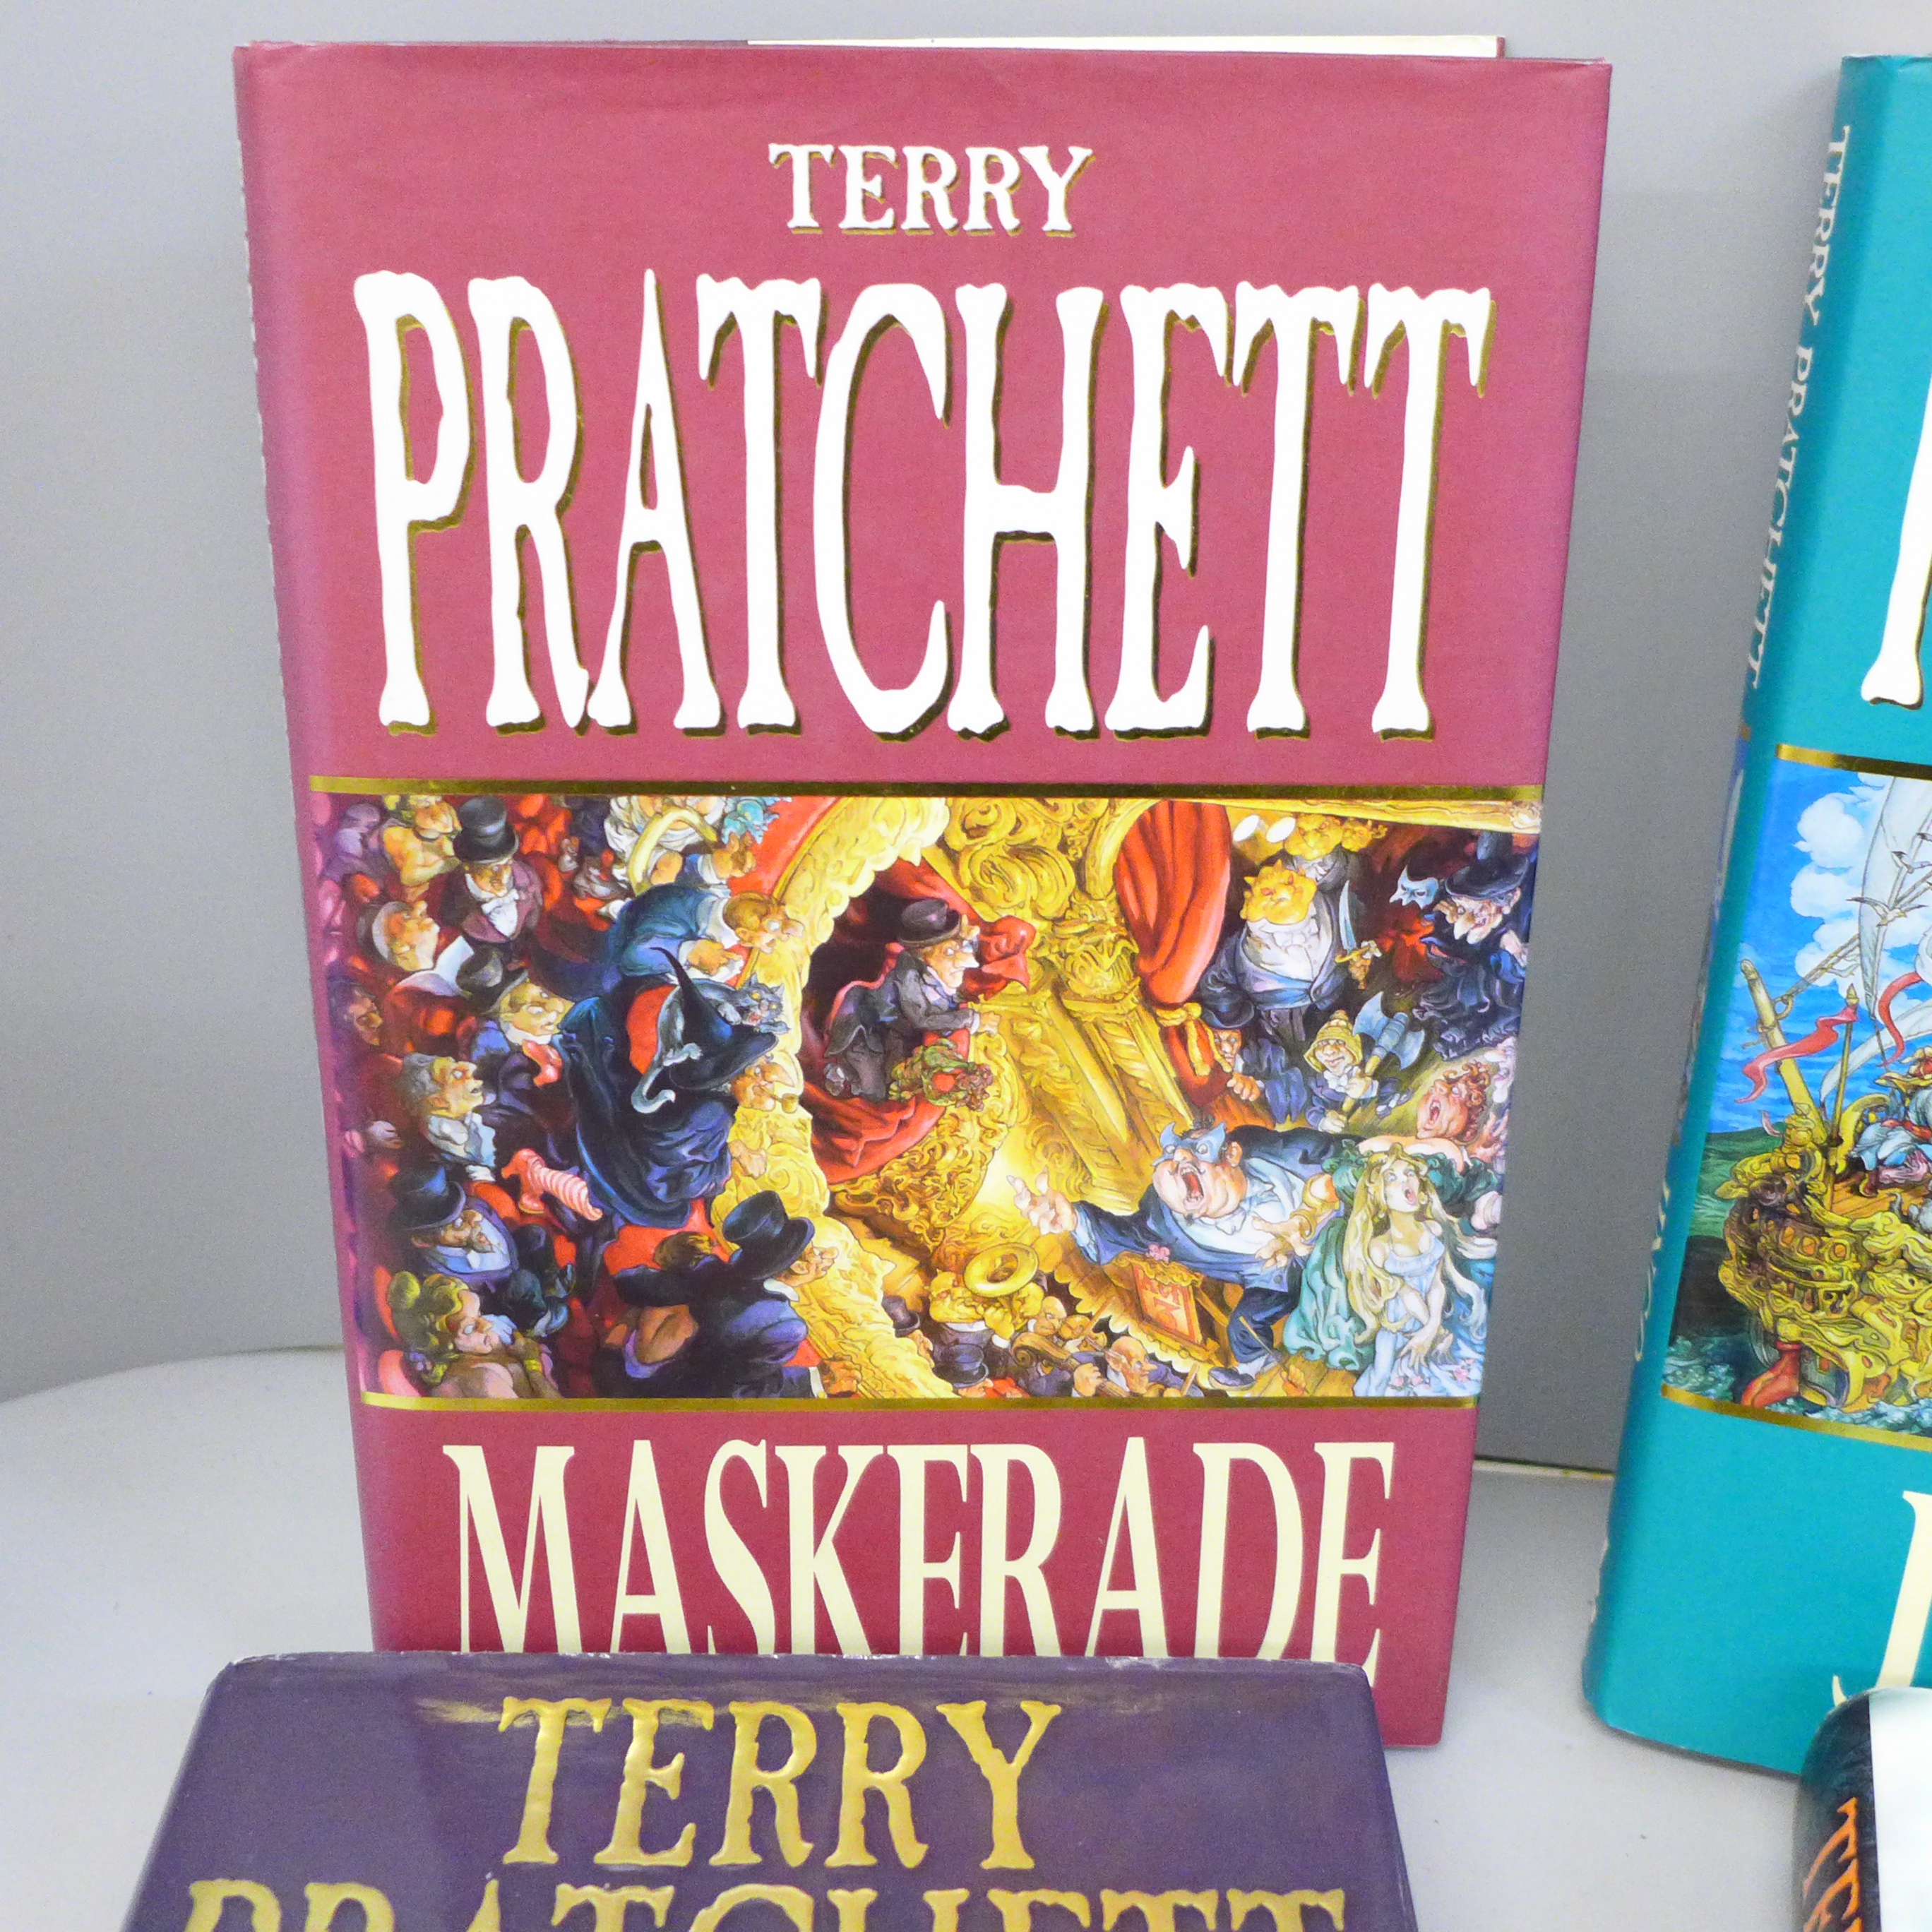 Four hardback first edition Discworld novels by Terry Pratchett with a signed paperback - - Image 2 of 3